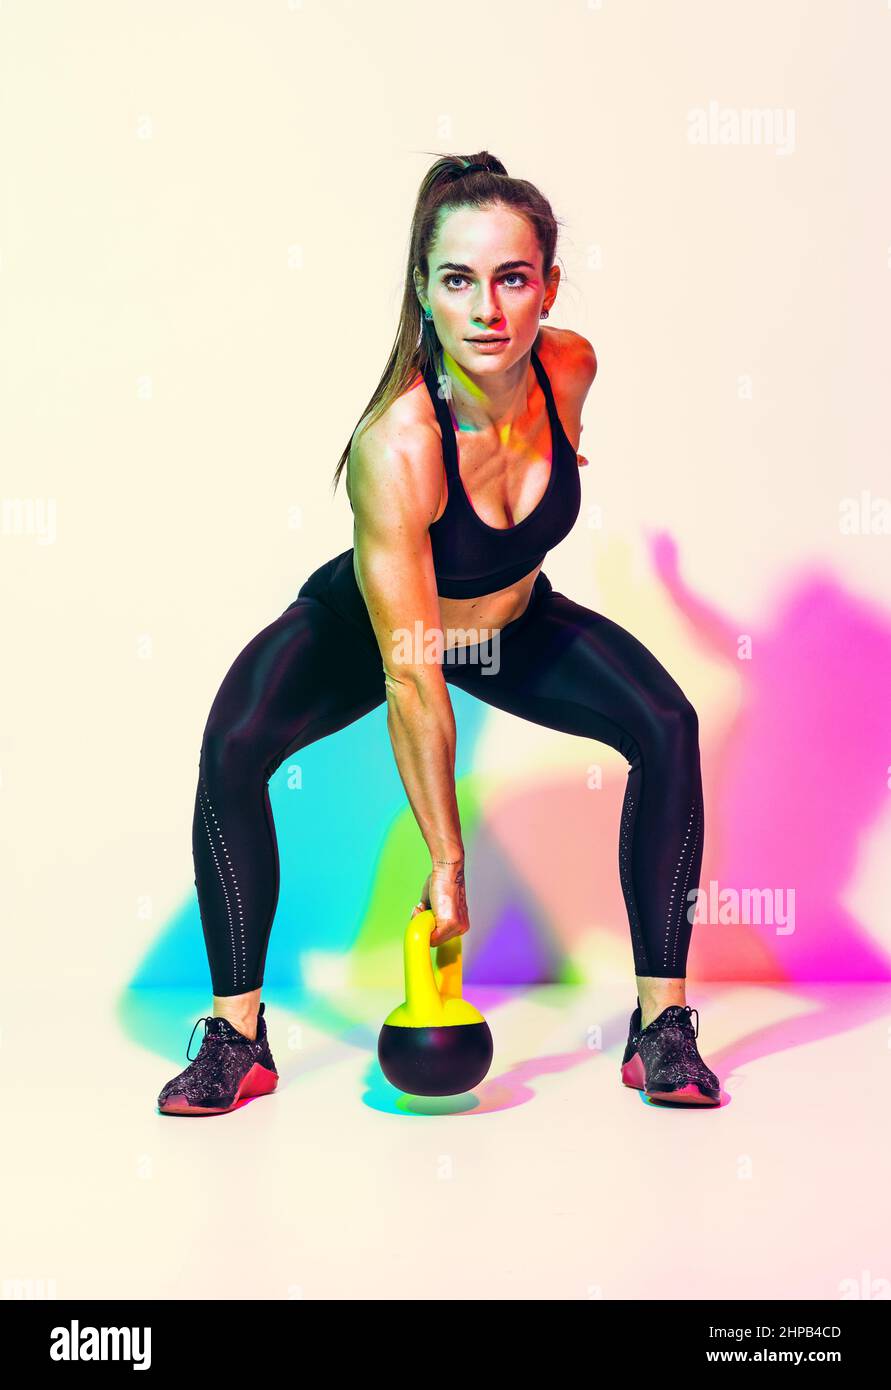 Sporty woman ready to swing the kettlebell up. Photo of woman in black sportswear on white background with effect of rgb colors shadows. Strength and Stock Photo